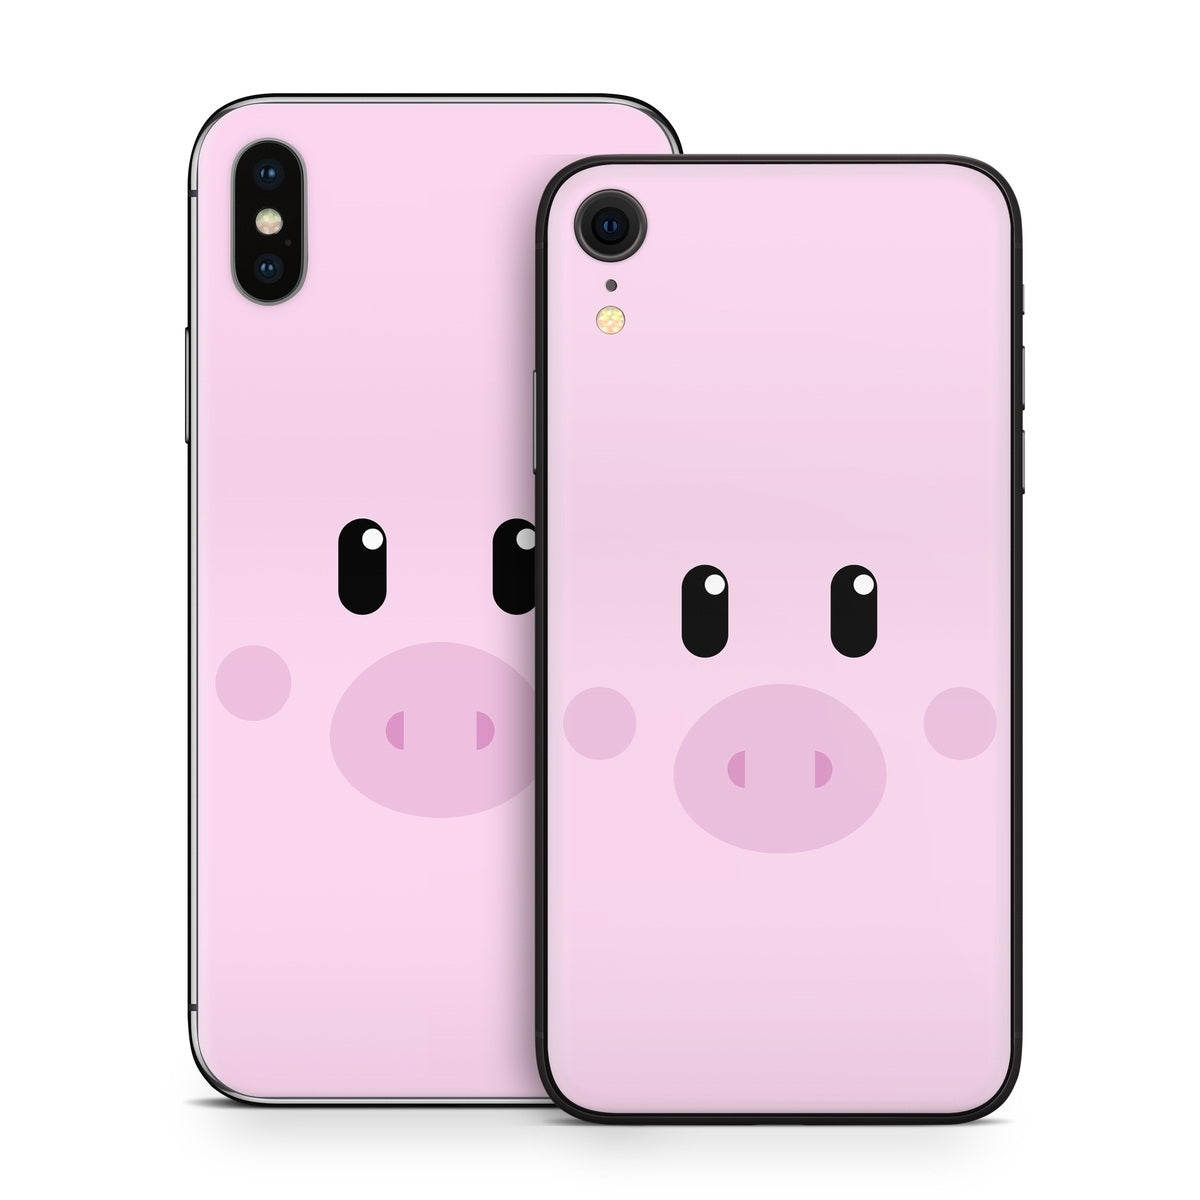 Wiggles the Pig - Apple iPhone X Skin